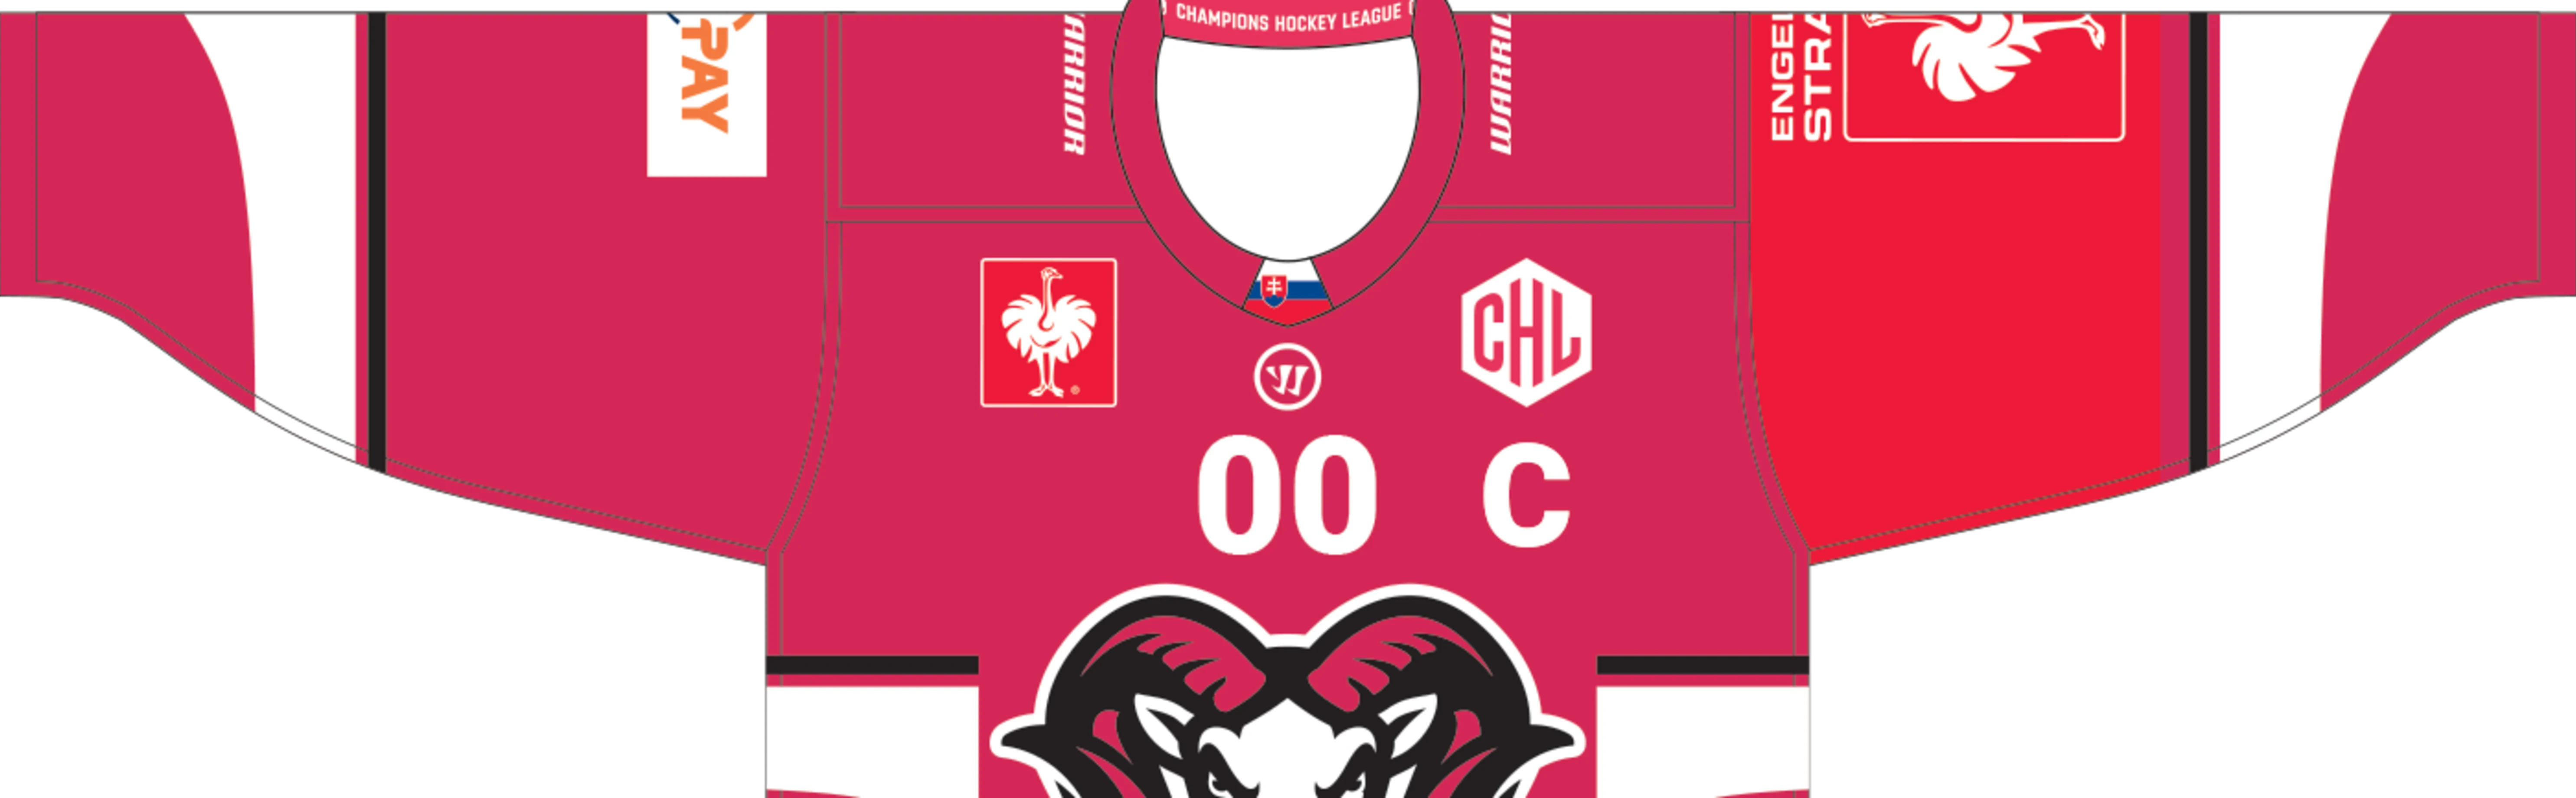 Special Edition Fan Jerseys for 2020/21 are now available in the Champions  Hockey League online store 👉www.shop-chl.com👈! Not only do you get a  cool, By Champions Hockey League